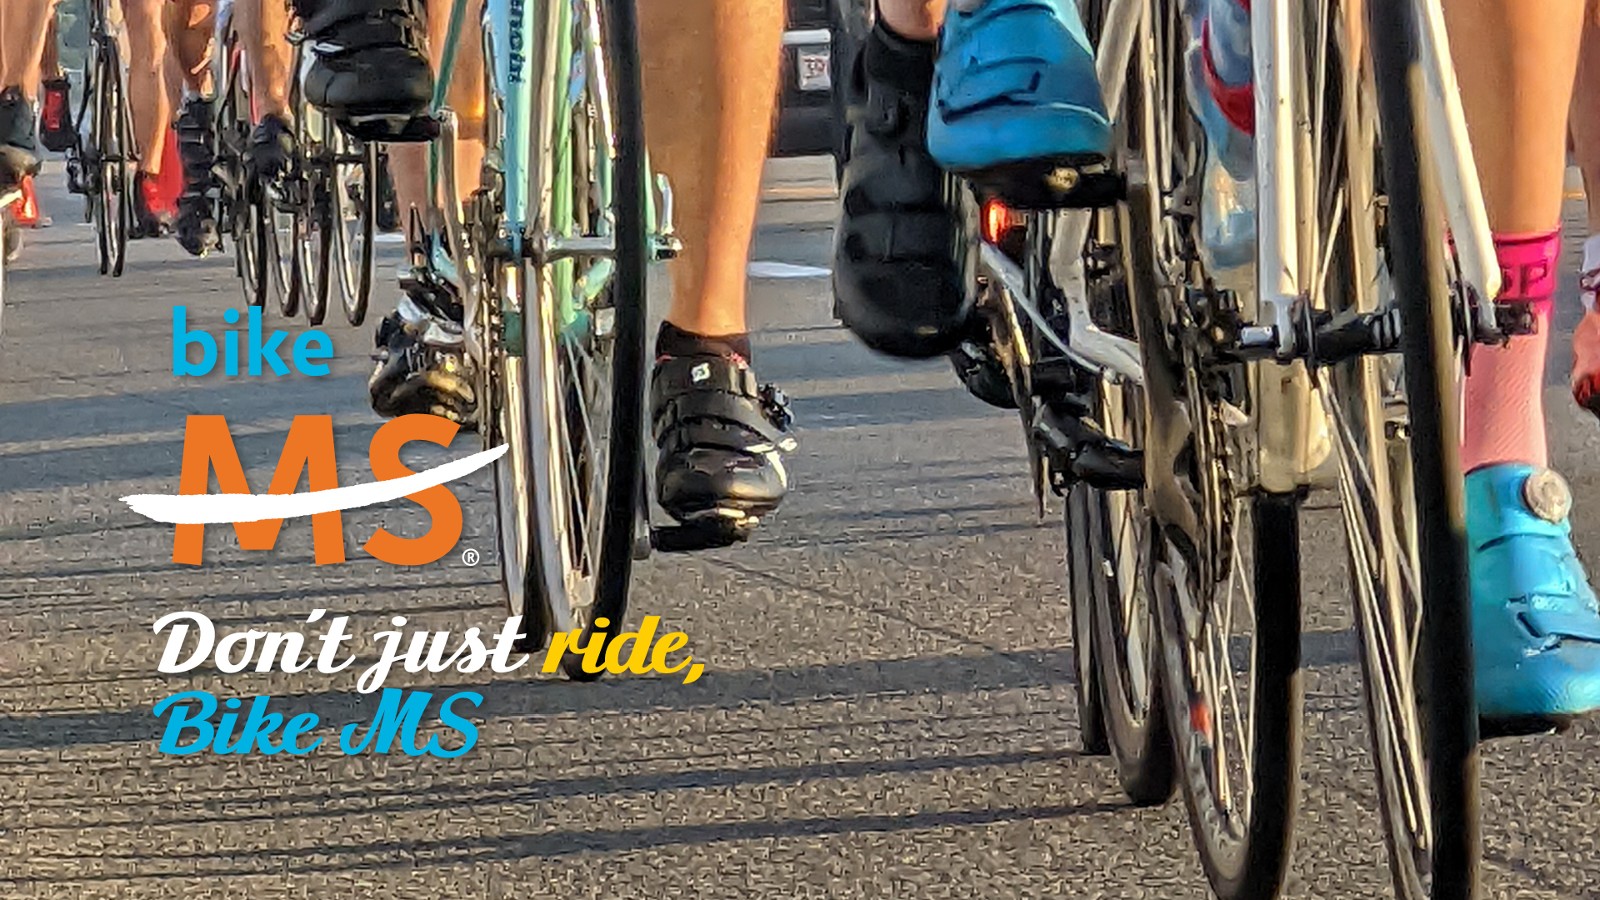 Facebook cover image depicting pedaling feet